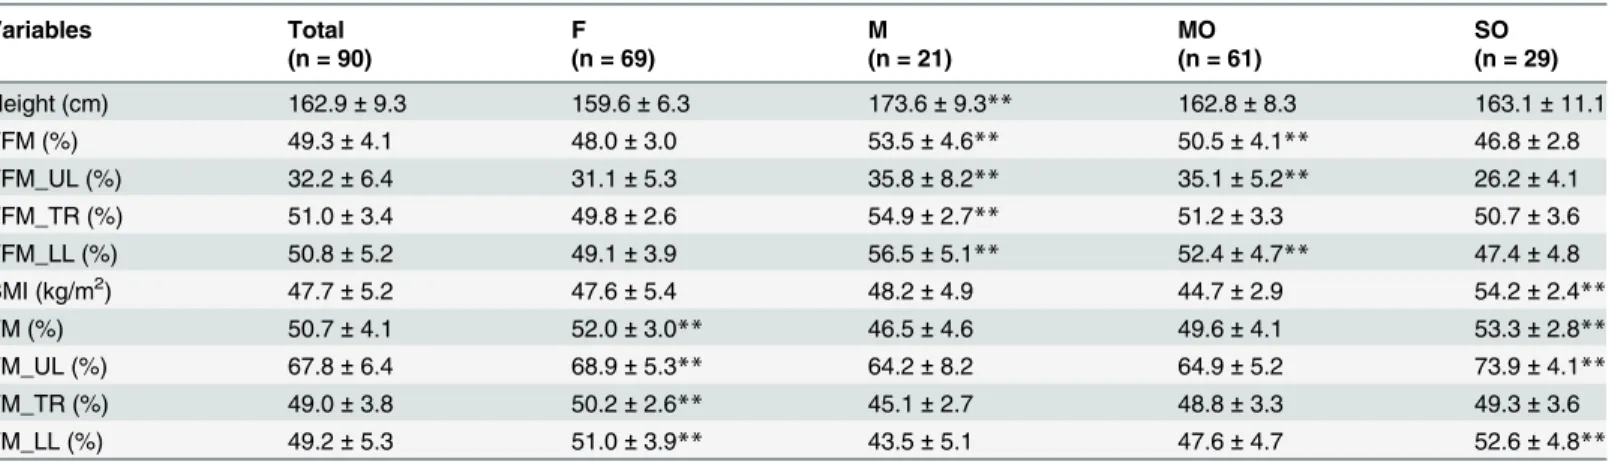 Table 2. Anthropometric characteristics and body composition of the study participants determined by BIA.